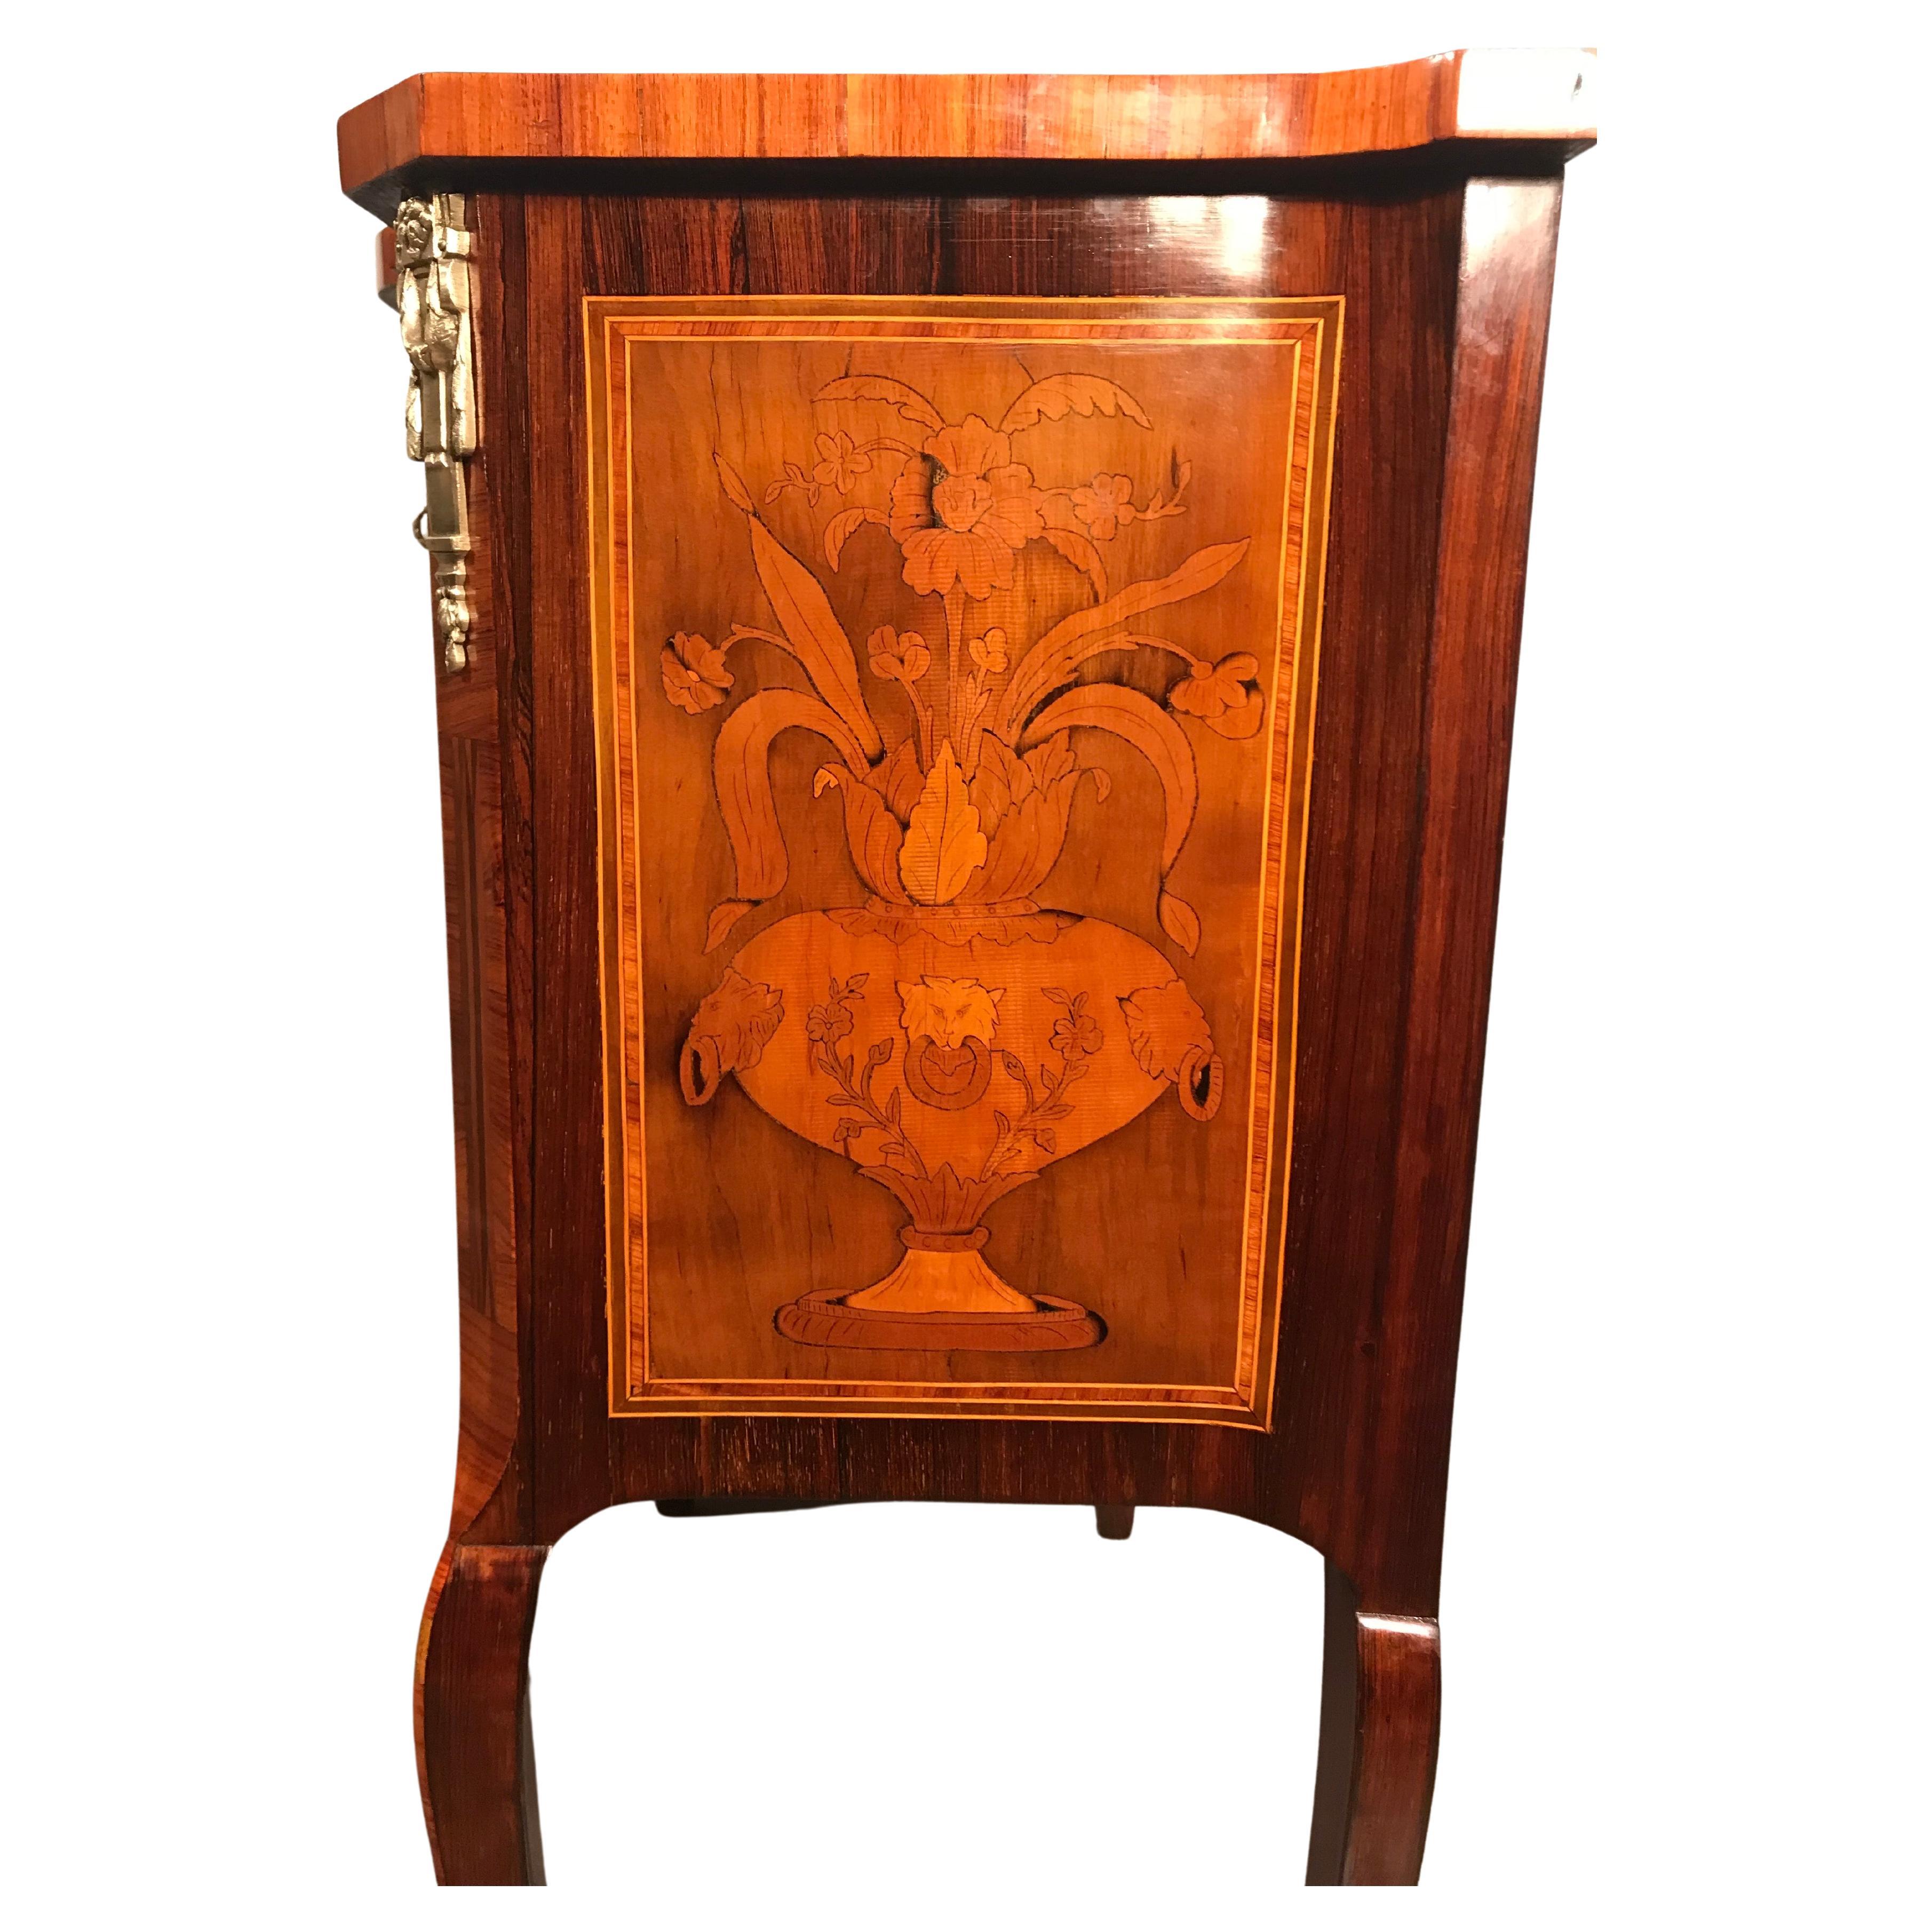 This small Louis XVI style dresser comes from France and dates back to the second half of the 19th century.

The two drawer commode stands on slightly curved legs which are decorated with foliate bronze sabots. The special part about this piece is